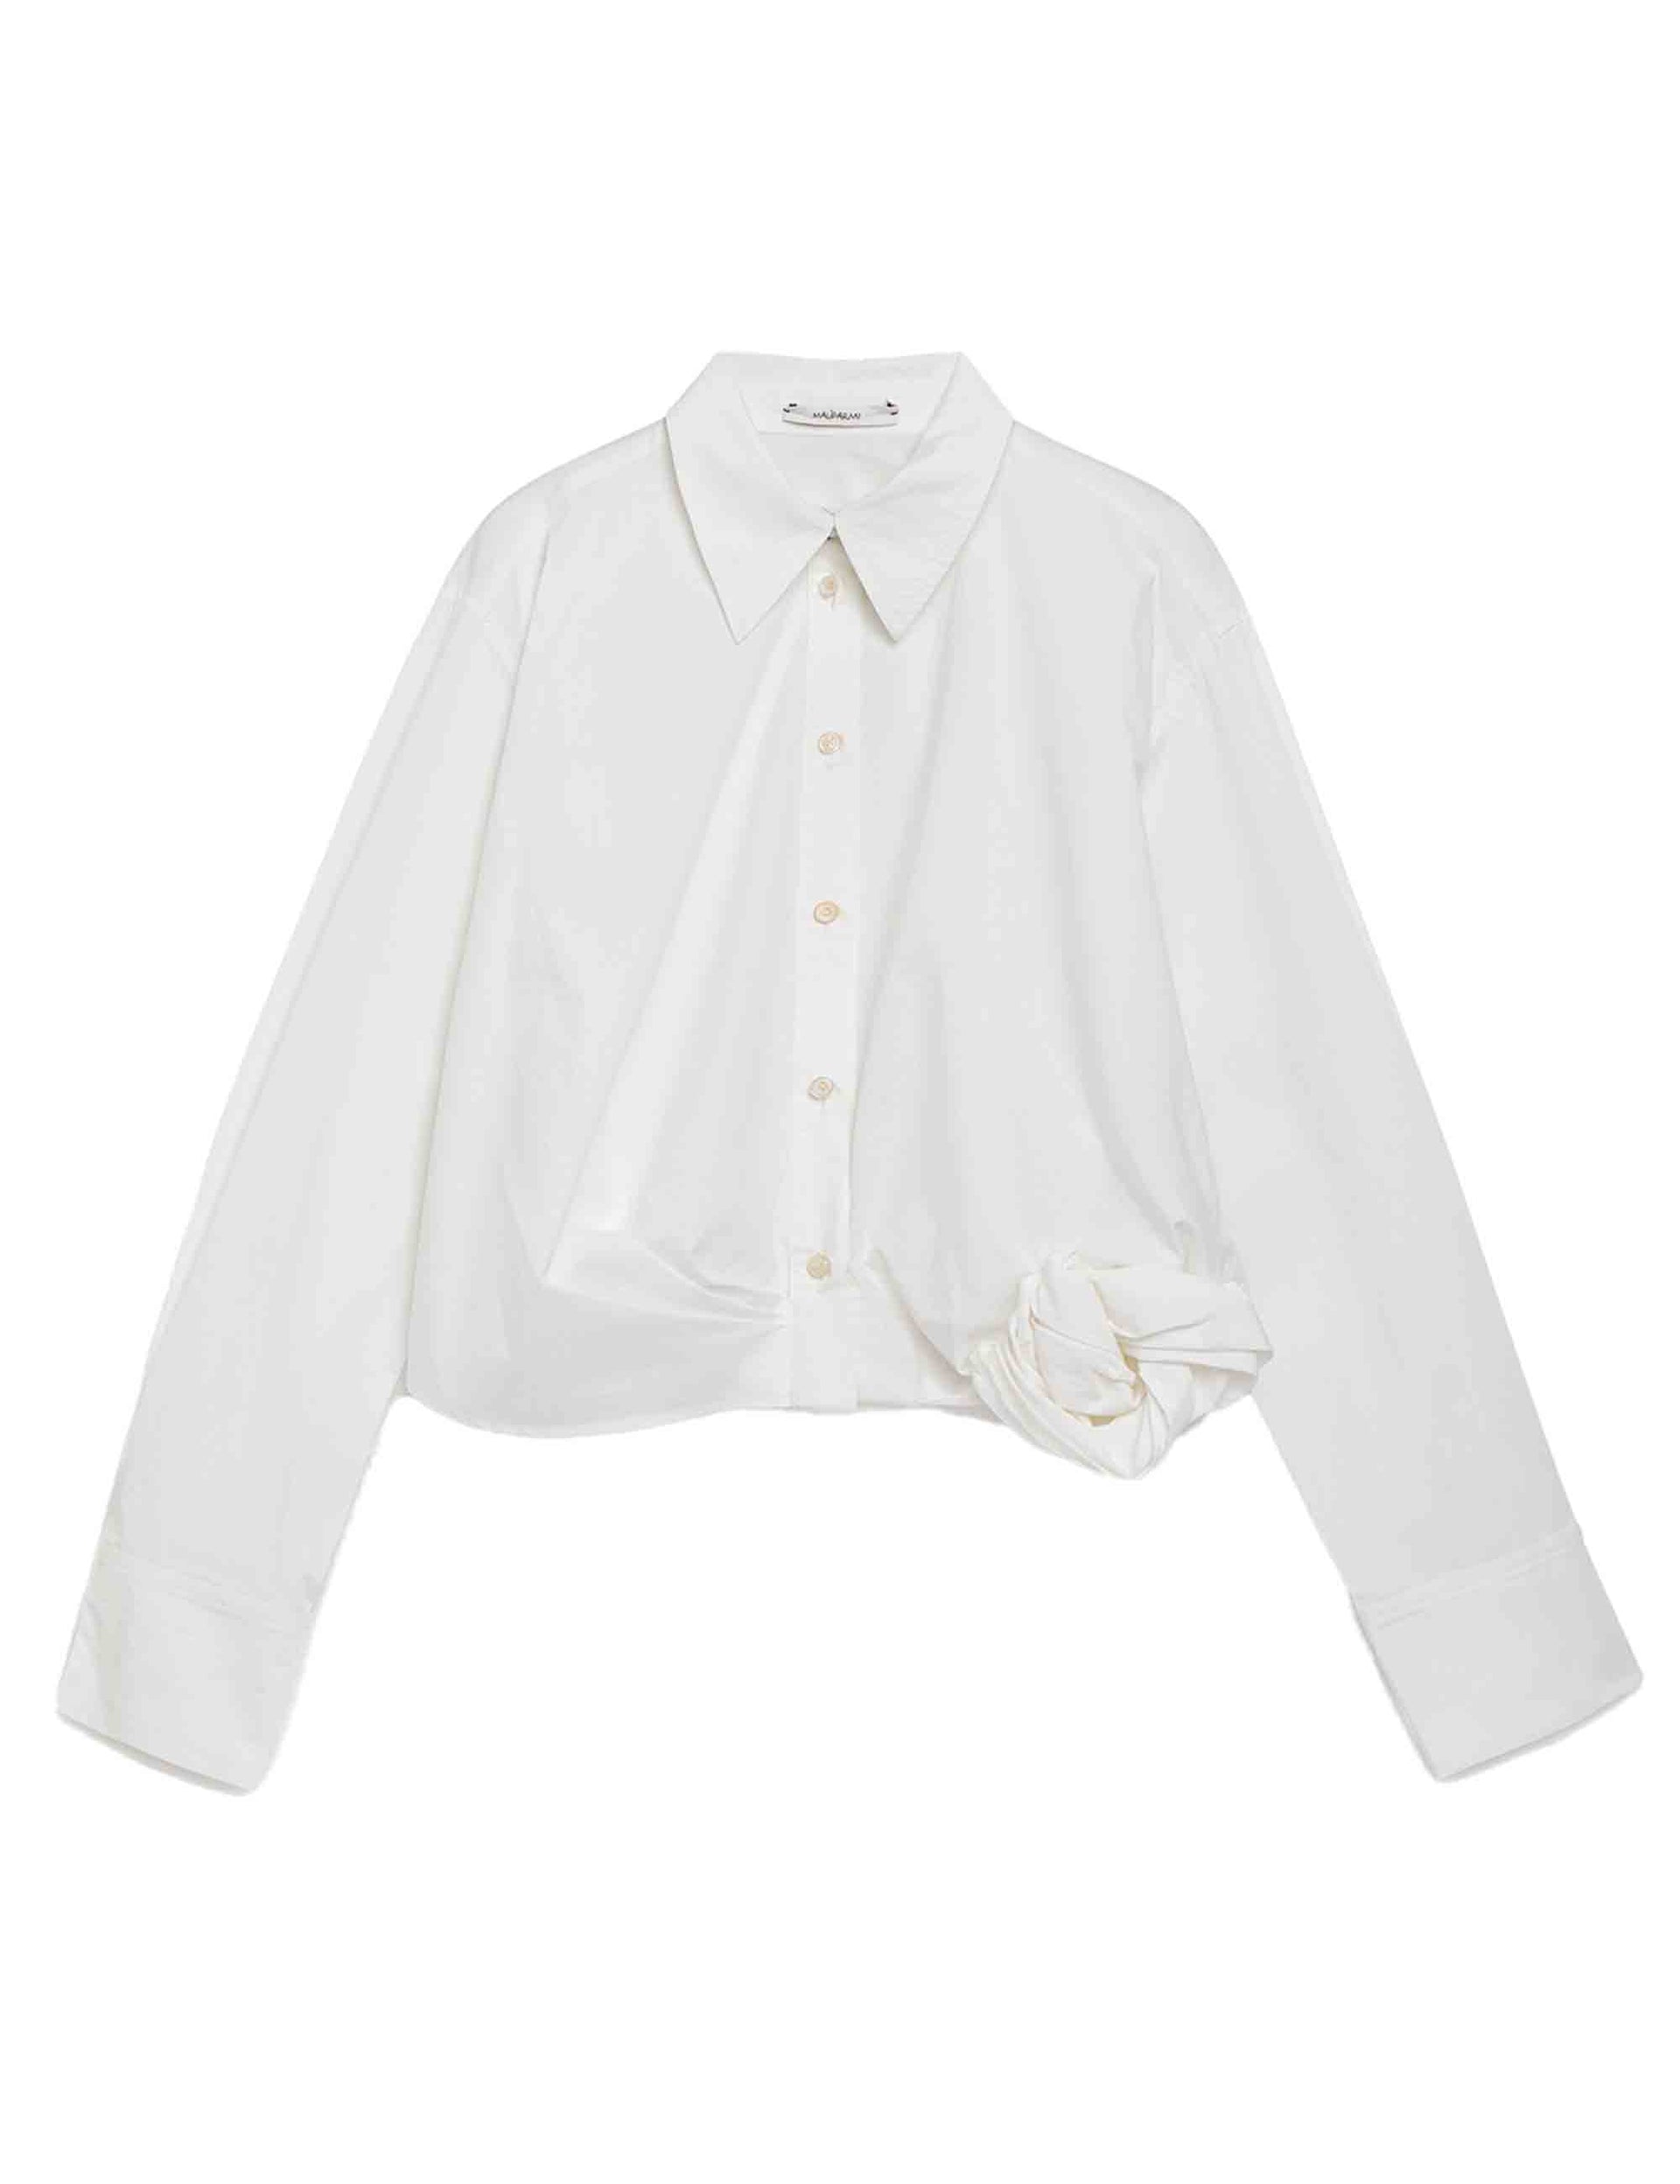 Sculture women's shirts in white cotton with pink